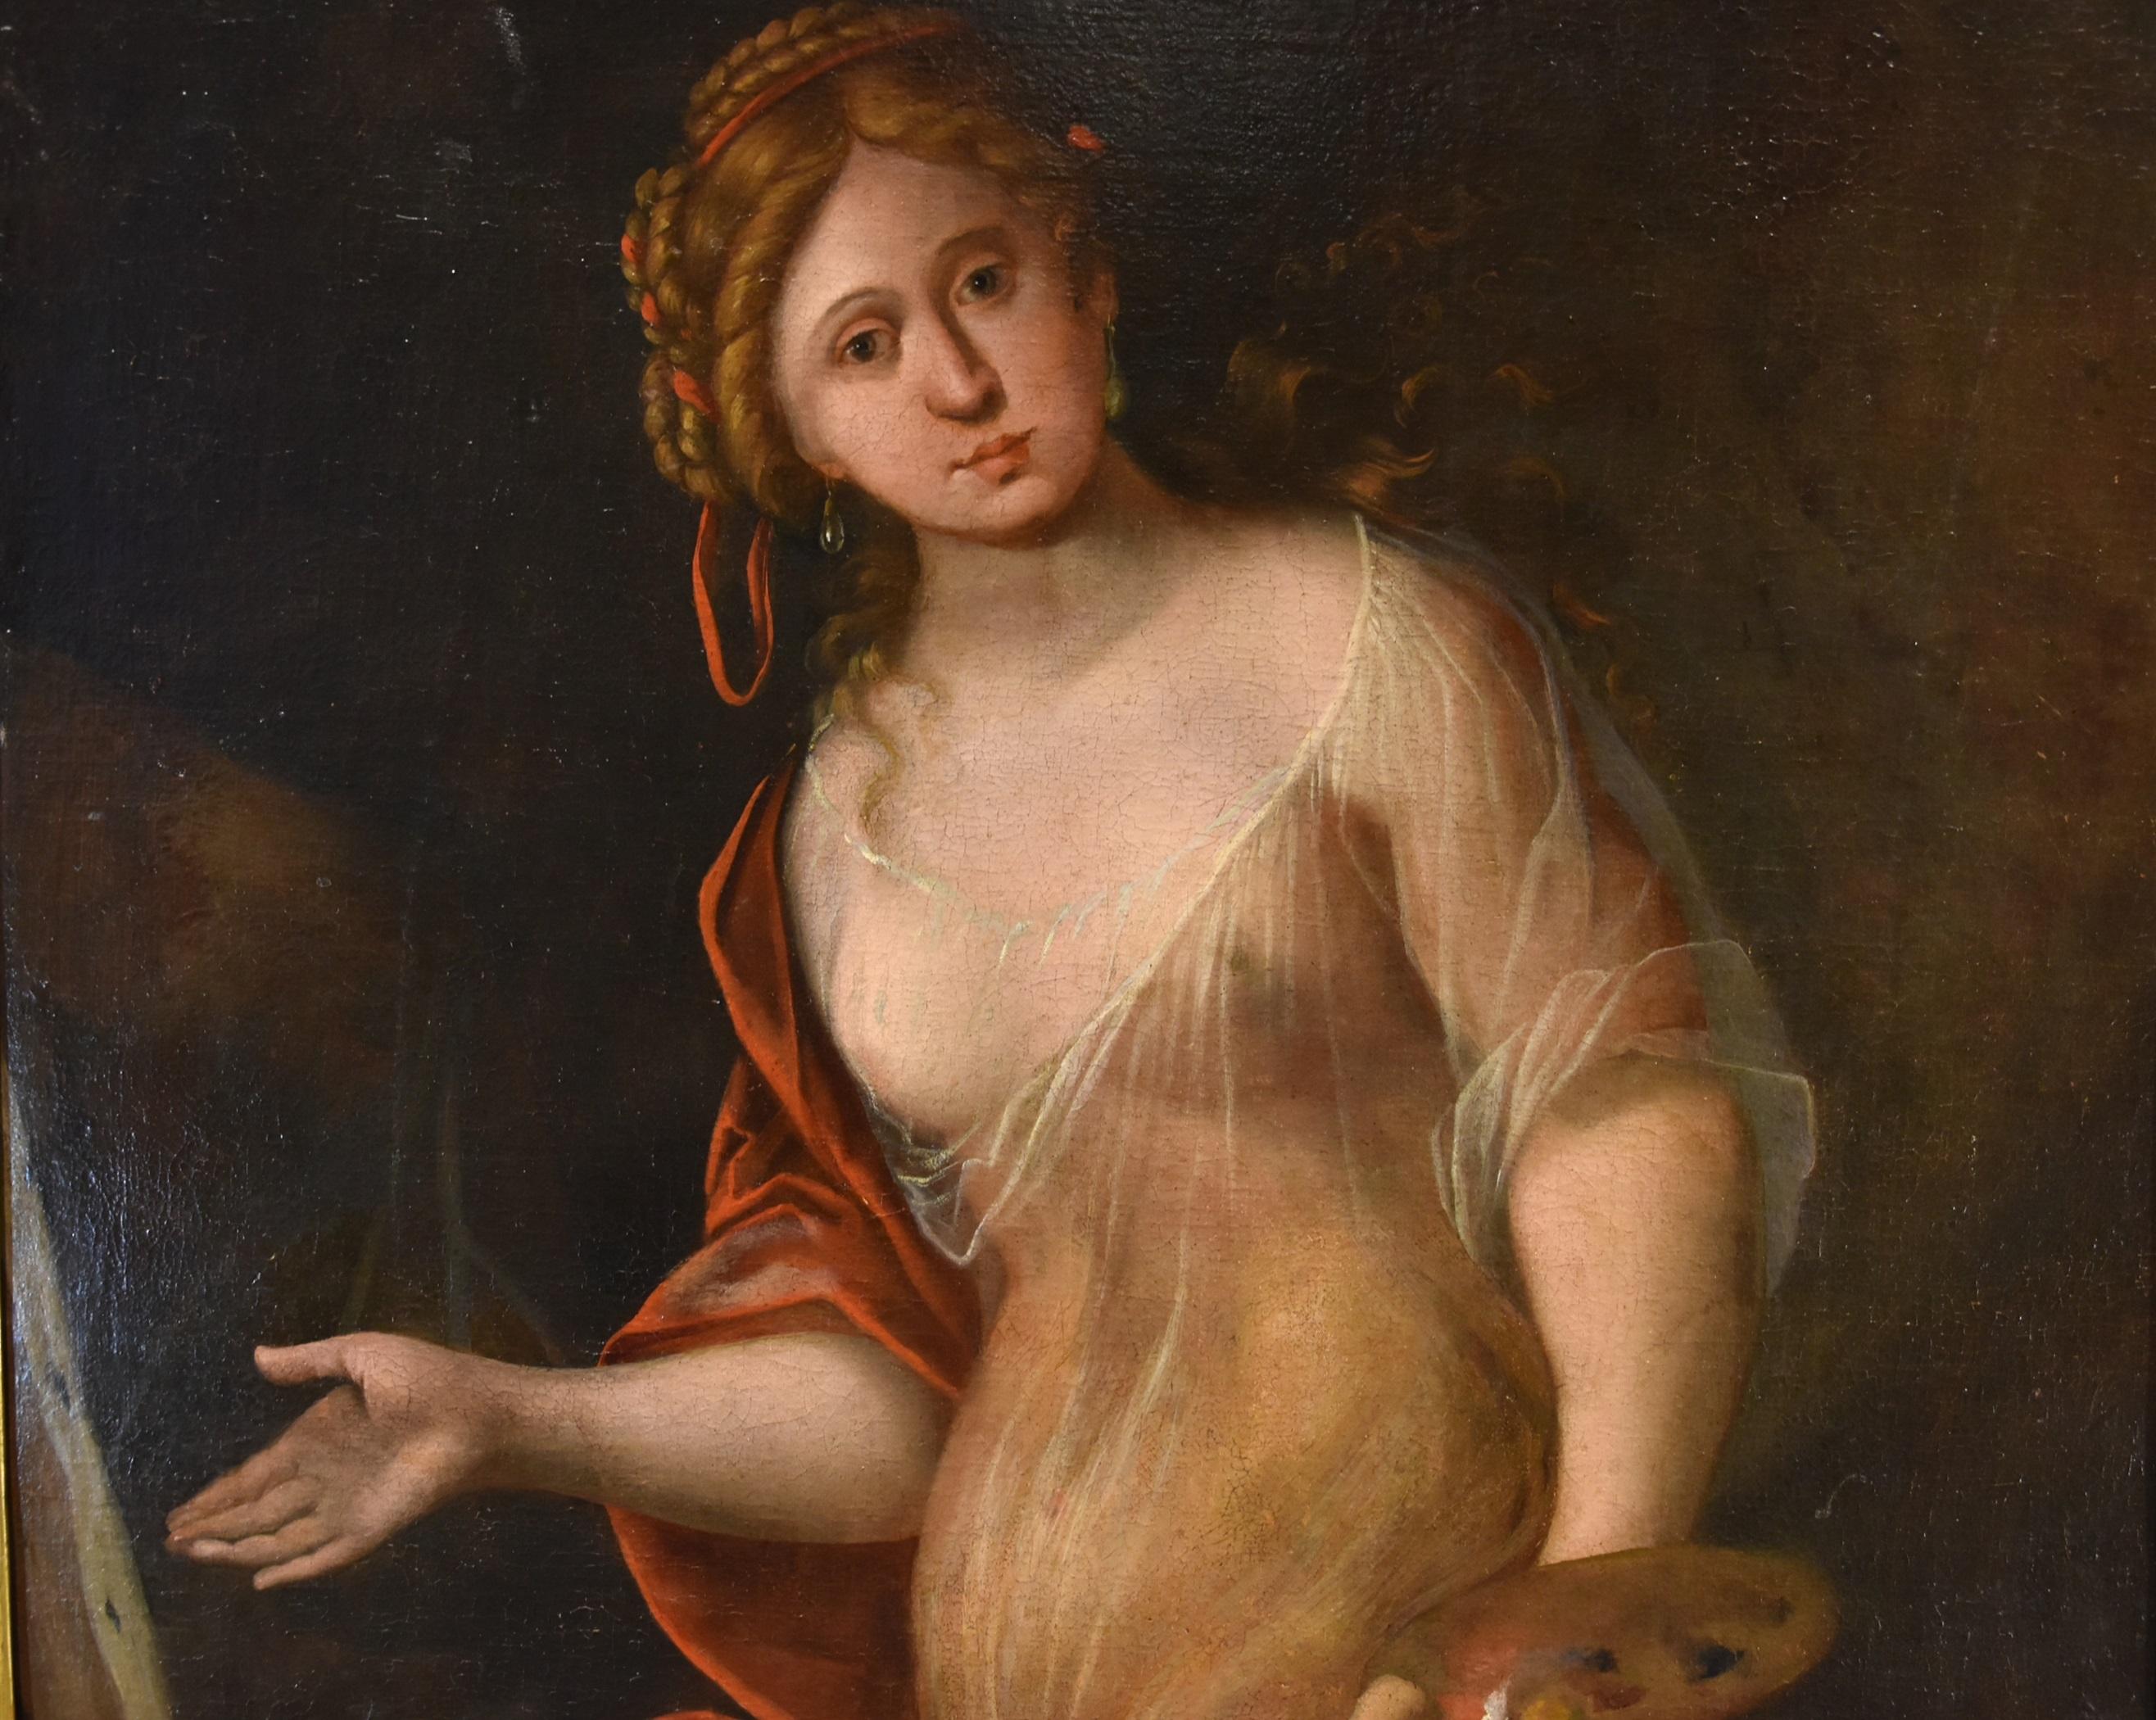 Terwesten Woman Allegory Art Paint Oil on canvas 17/18th Century Old master  For Sale 3